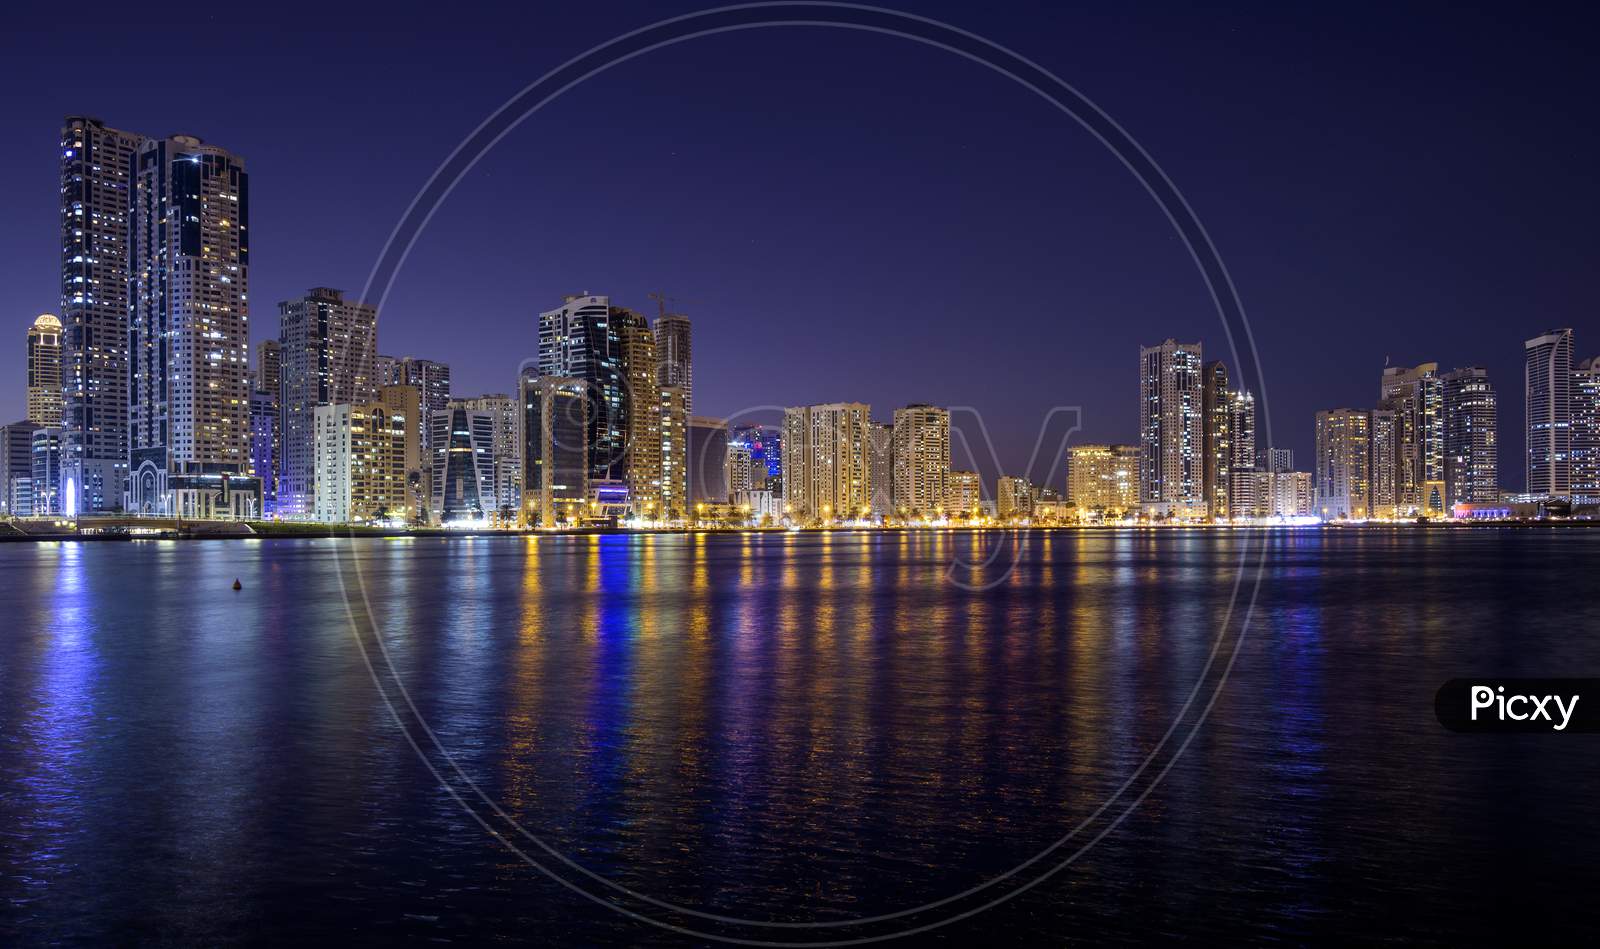 Sharjah,Uae - Dec 2Nd 2020. Panoramic View Of The Illuminated Sky Scrappers Showing Beautiful Reflections In Water Captured At The Al Majaz Waterfront Sharjah , Uae.